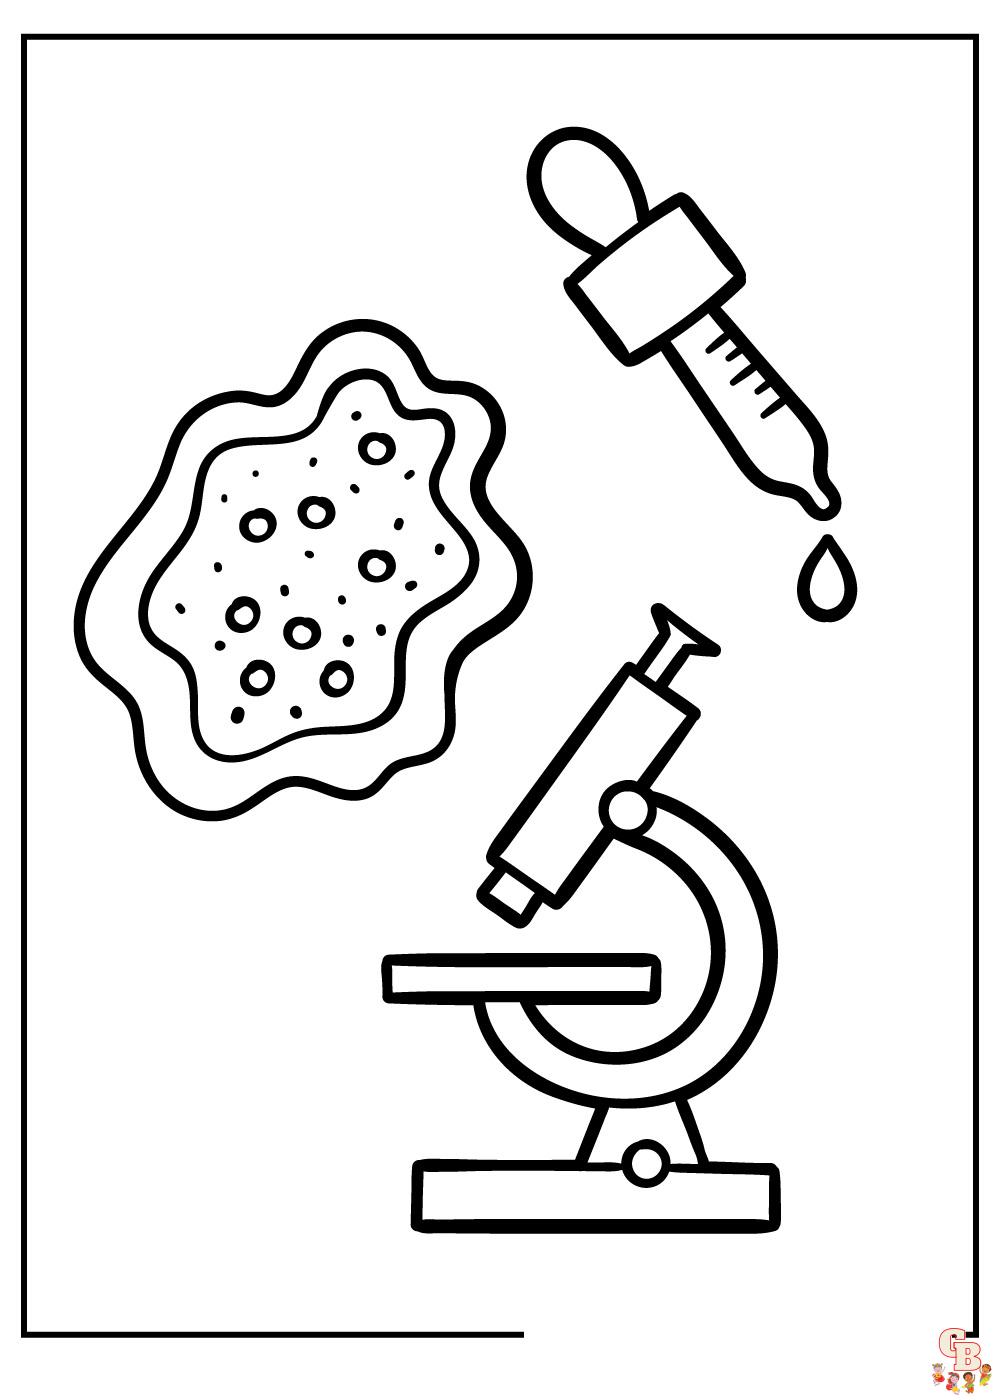 Science Coloring Pages